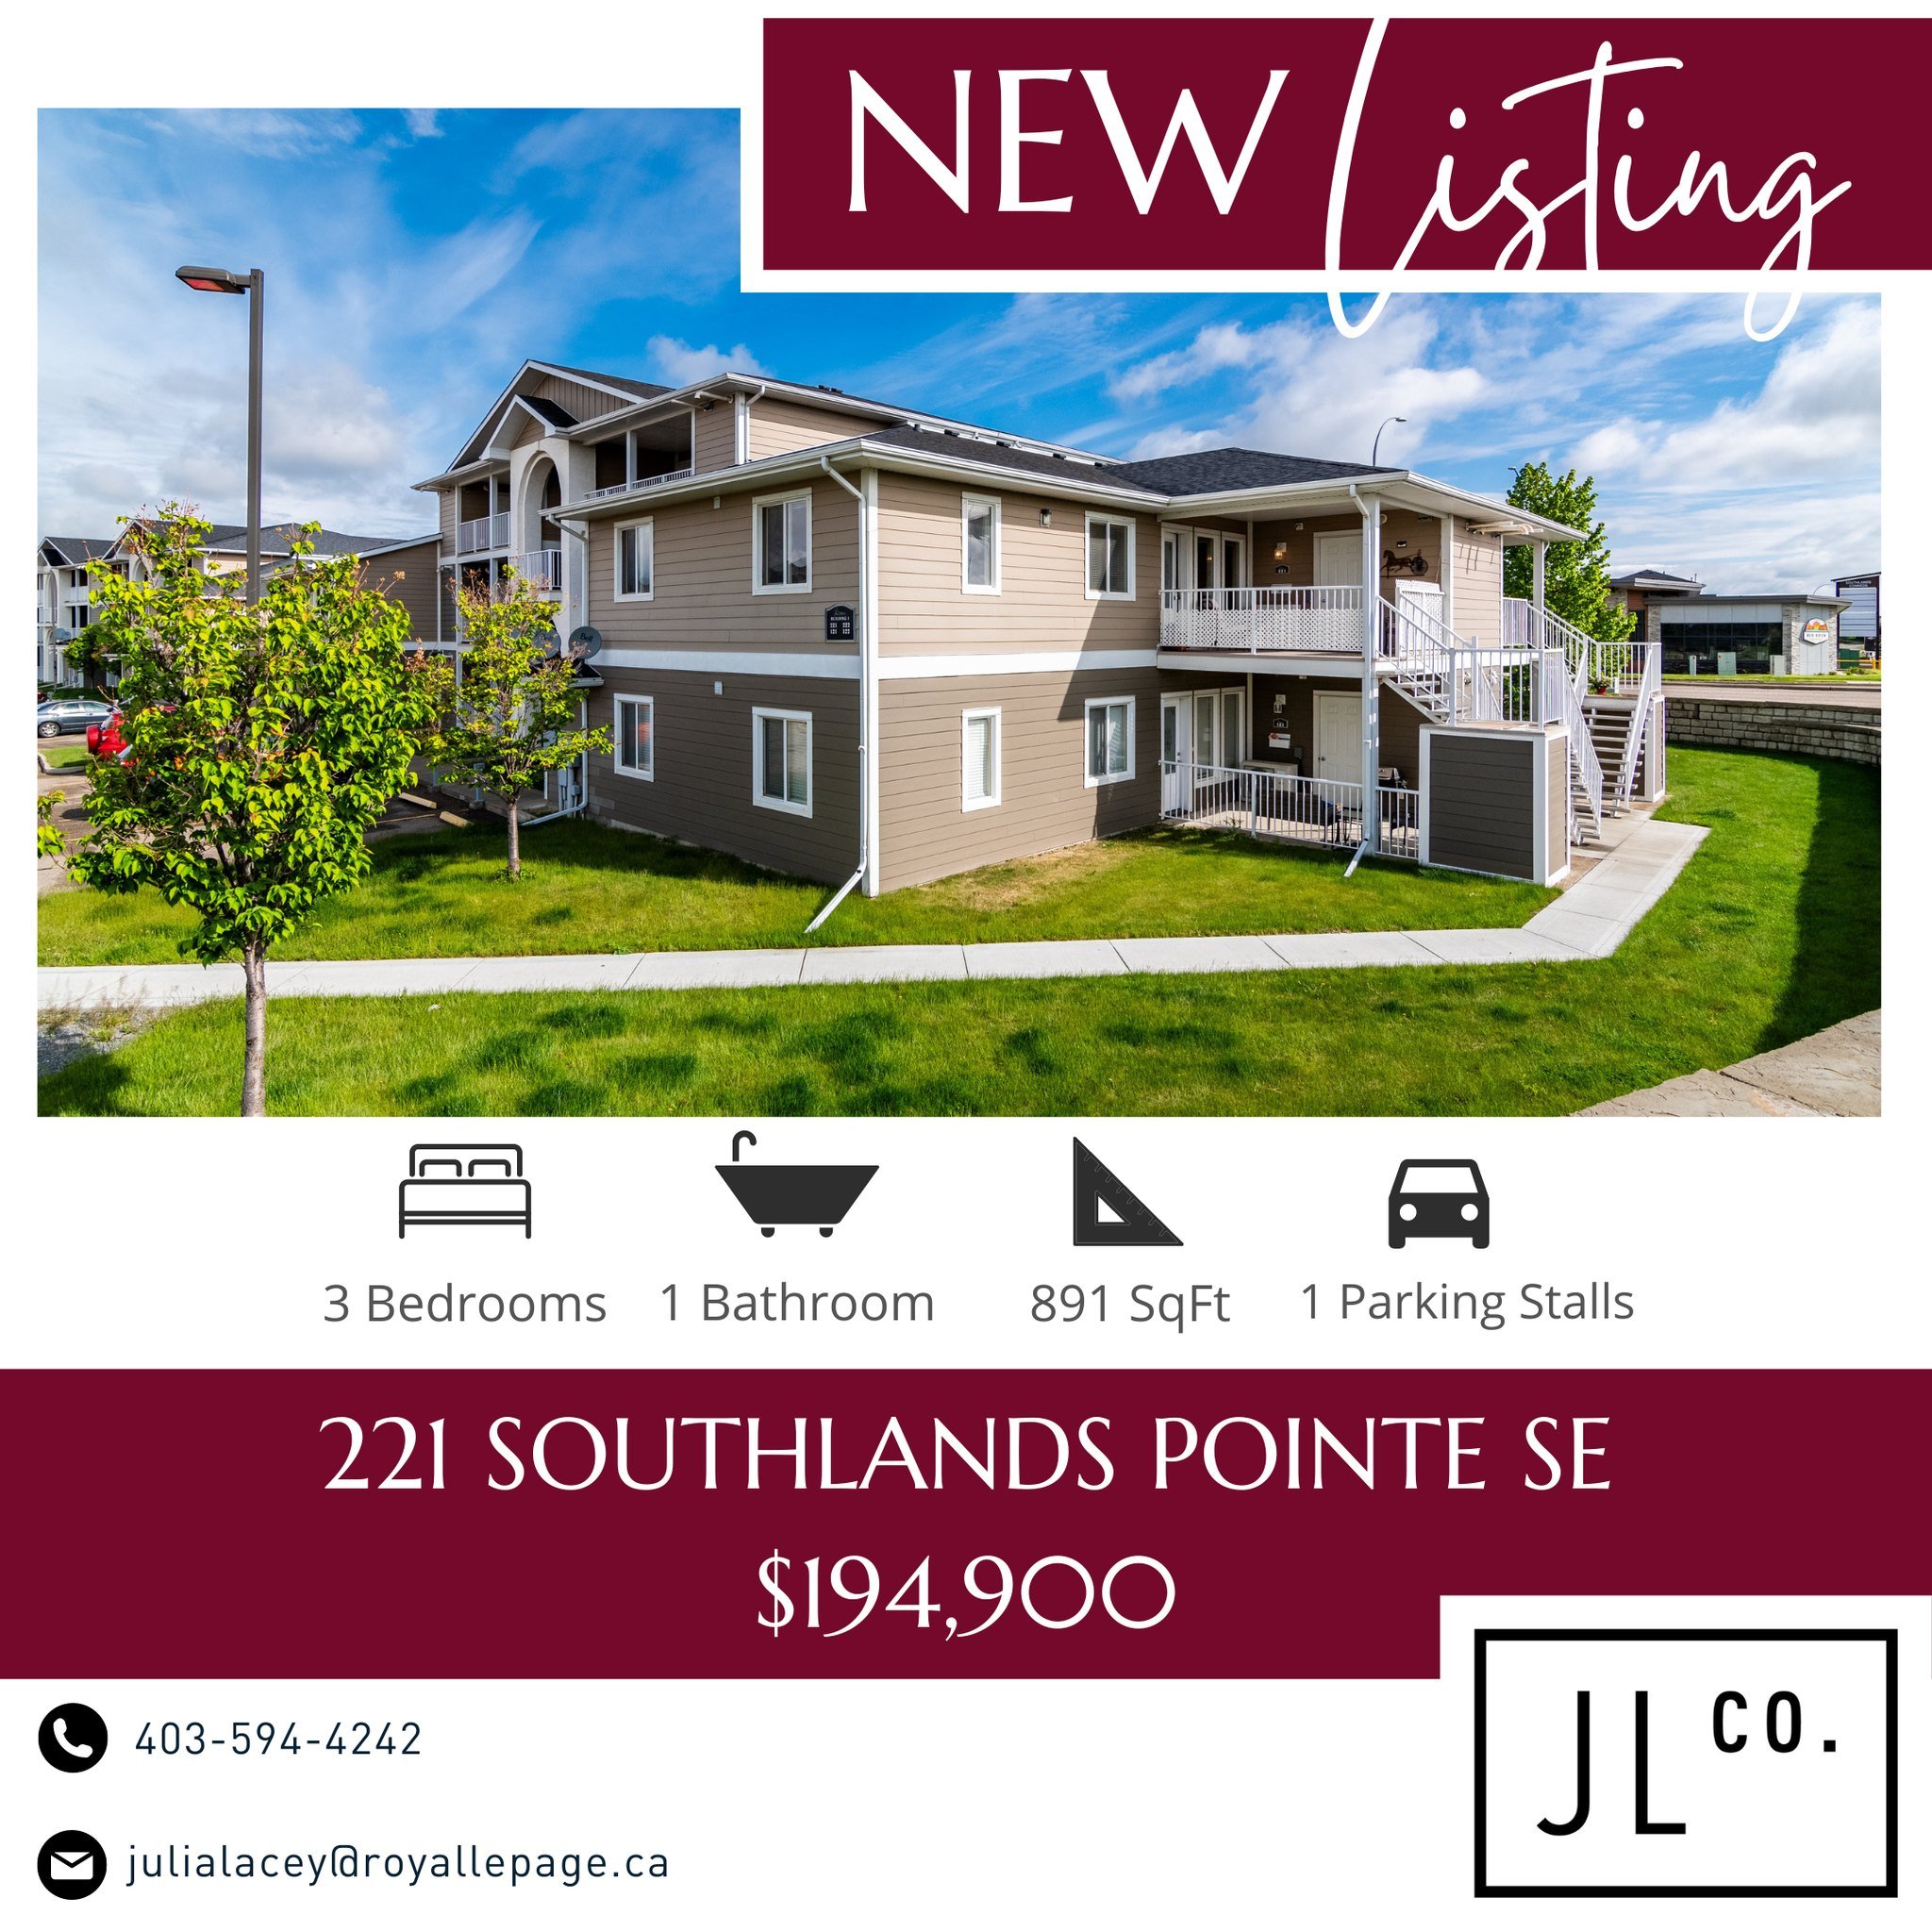 New Condo Listing!!!

Welcome to Southlands Pointe, a vibrant condo community perfect for families, first-time homeowners, investors, and downsizers. This 891 SqFt condo features 3 bedrooms and 1 bathroom, situated on the top floor for enhanced priva